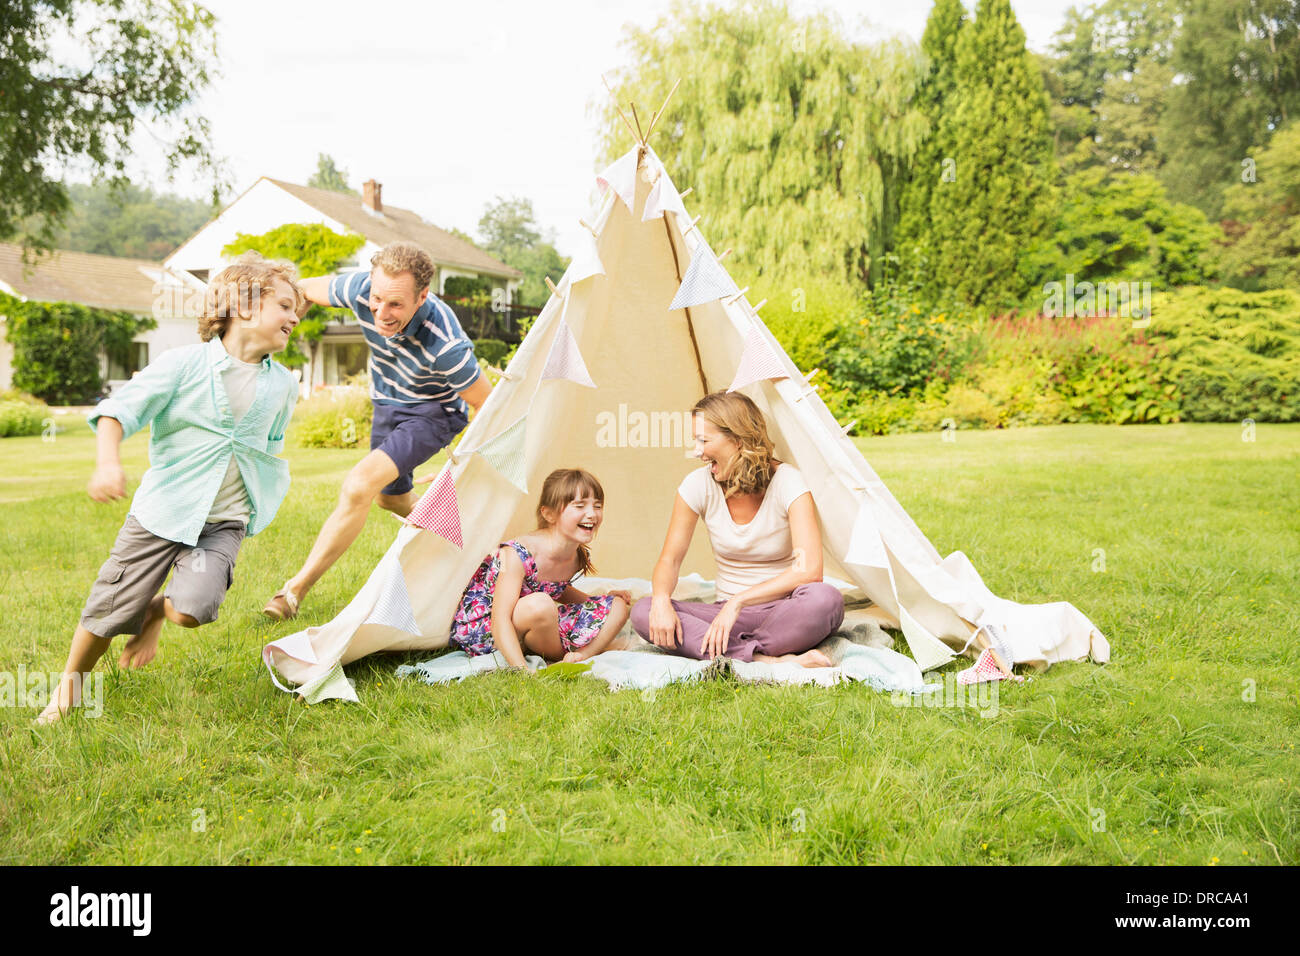 Father chasing son around teepee in backyard Stock Photo